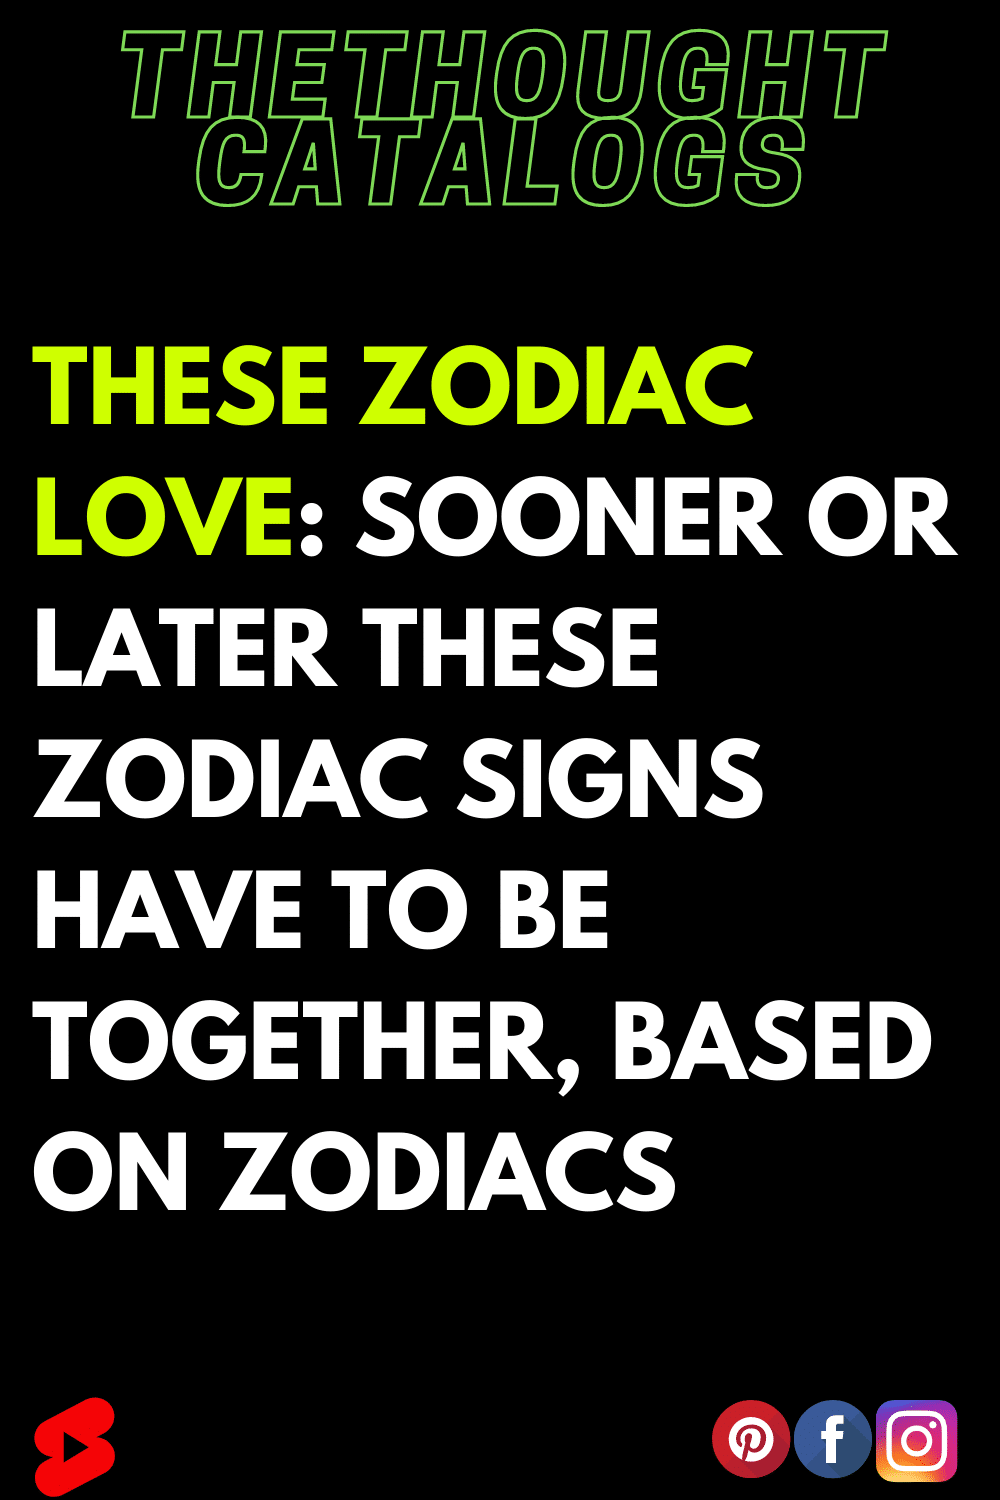 These Zodiac Love: Sooner Or Later These Zodiac Signs Have To Be ...